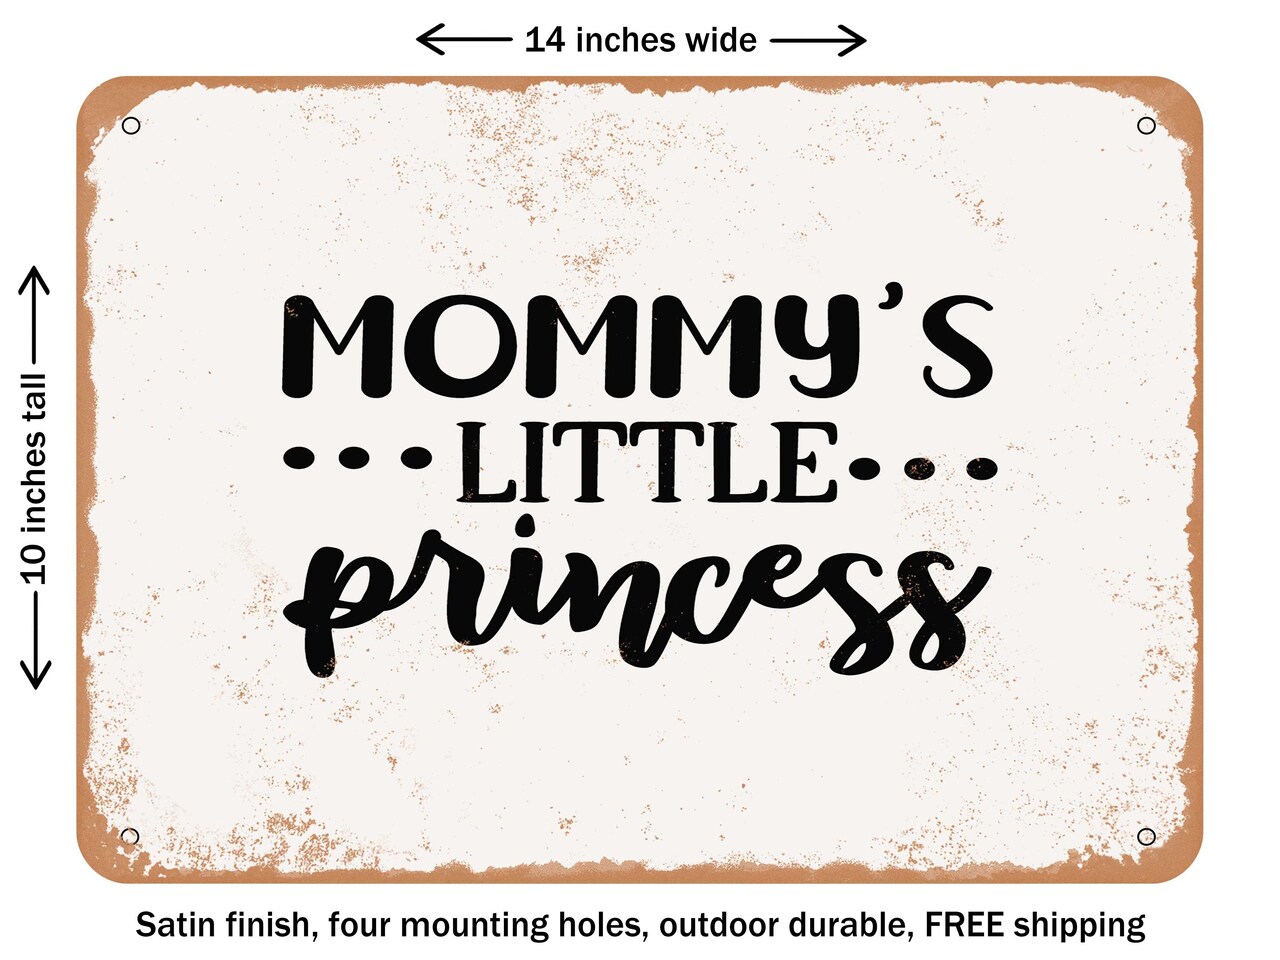 DECORATIVE METAL SIGN - Mommy&#x27;s Little Princess - Vintage Rusty Look